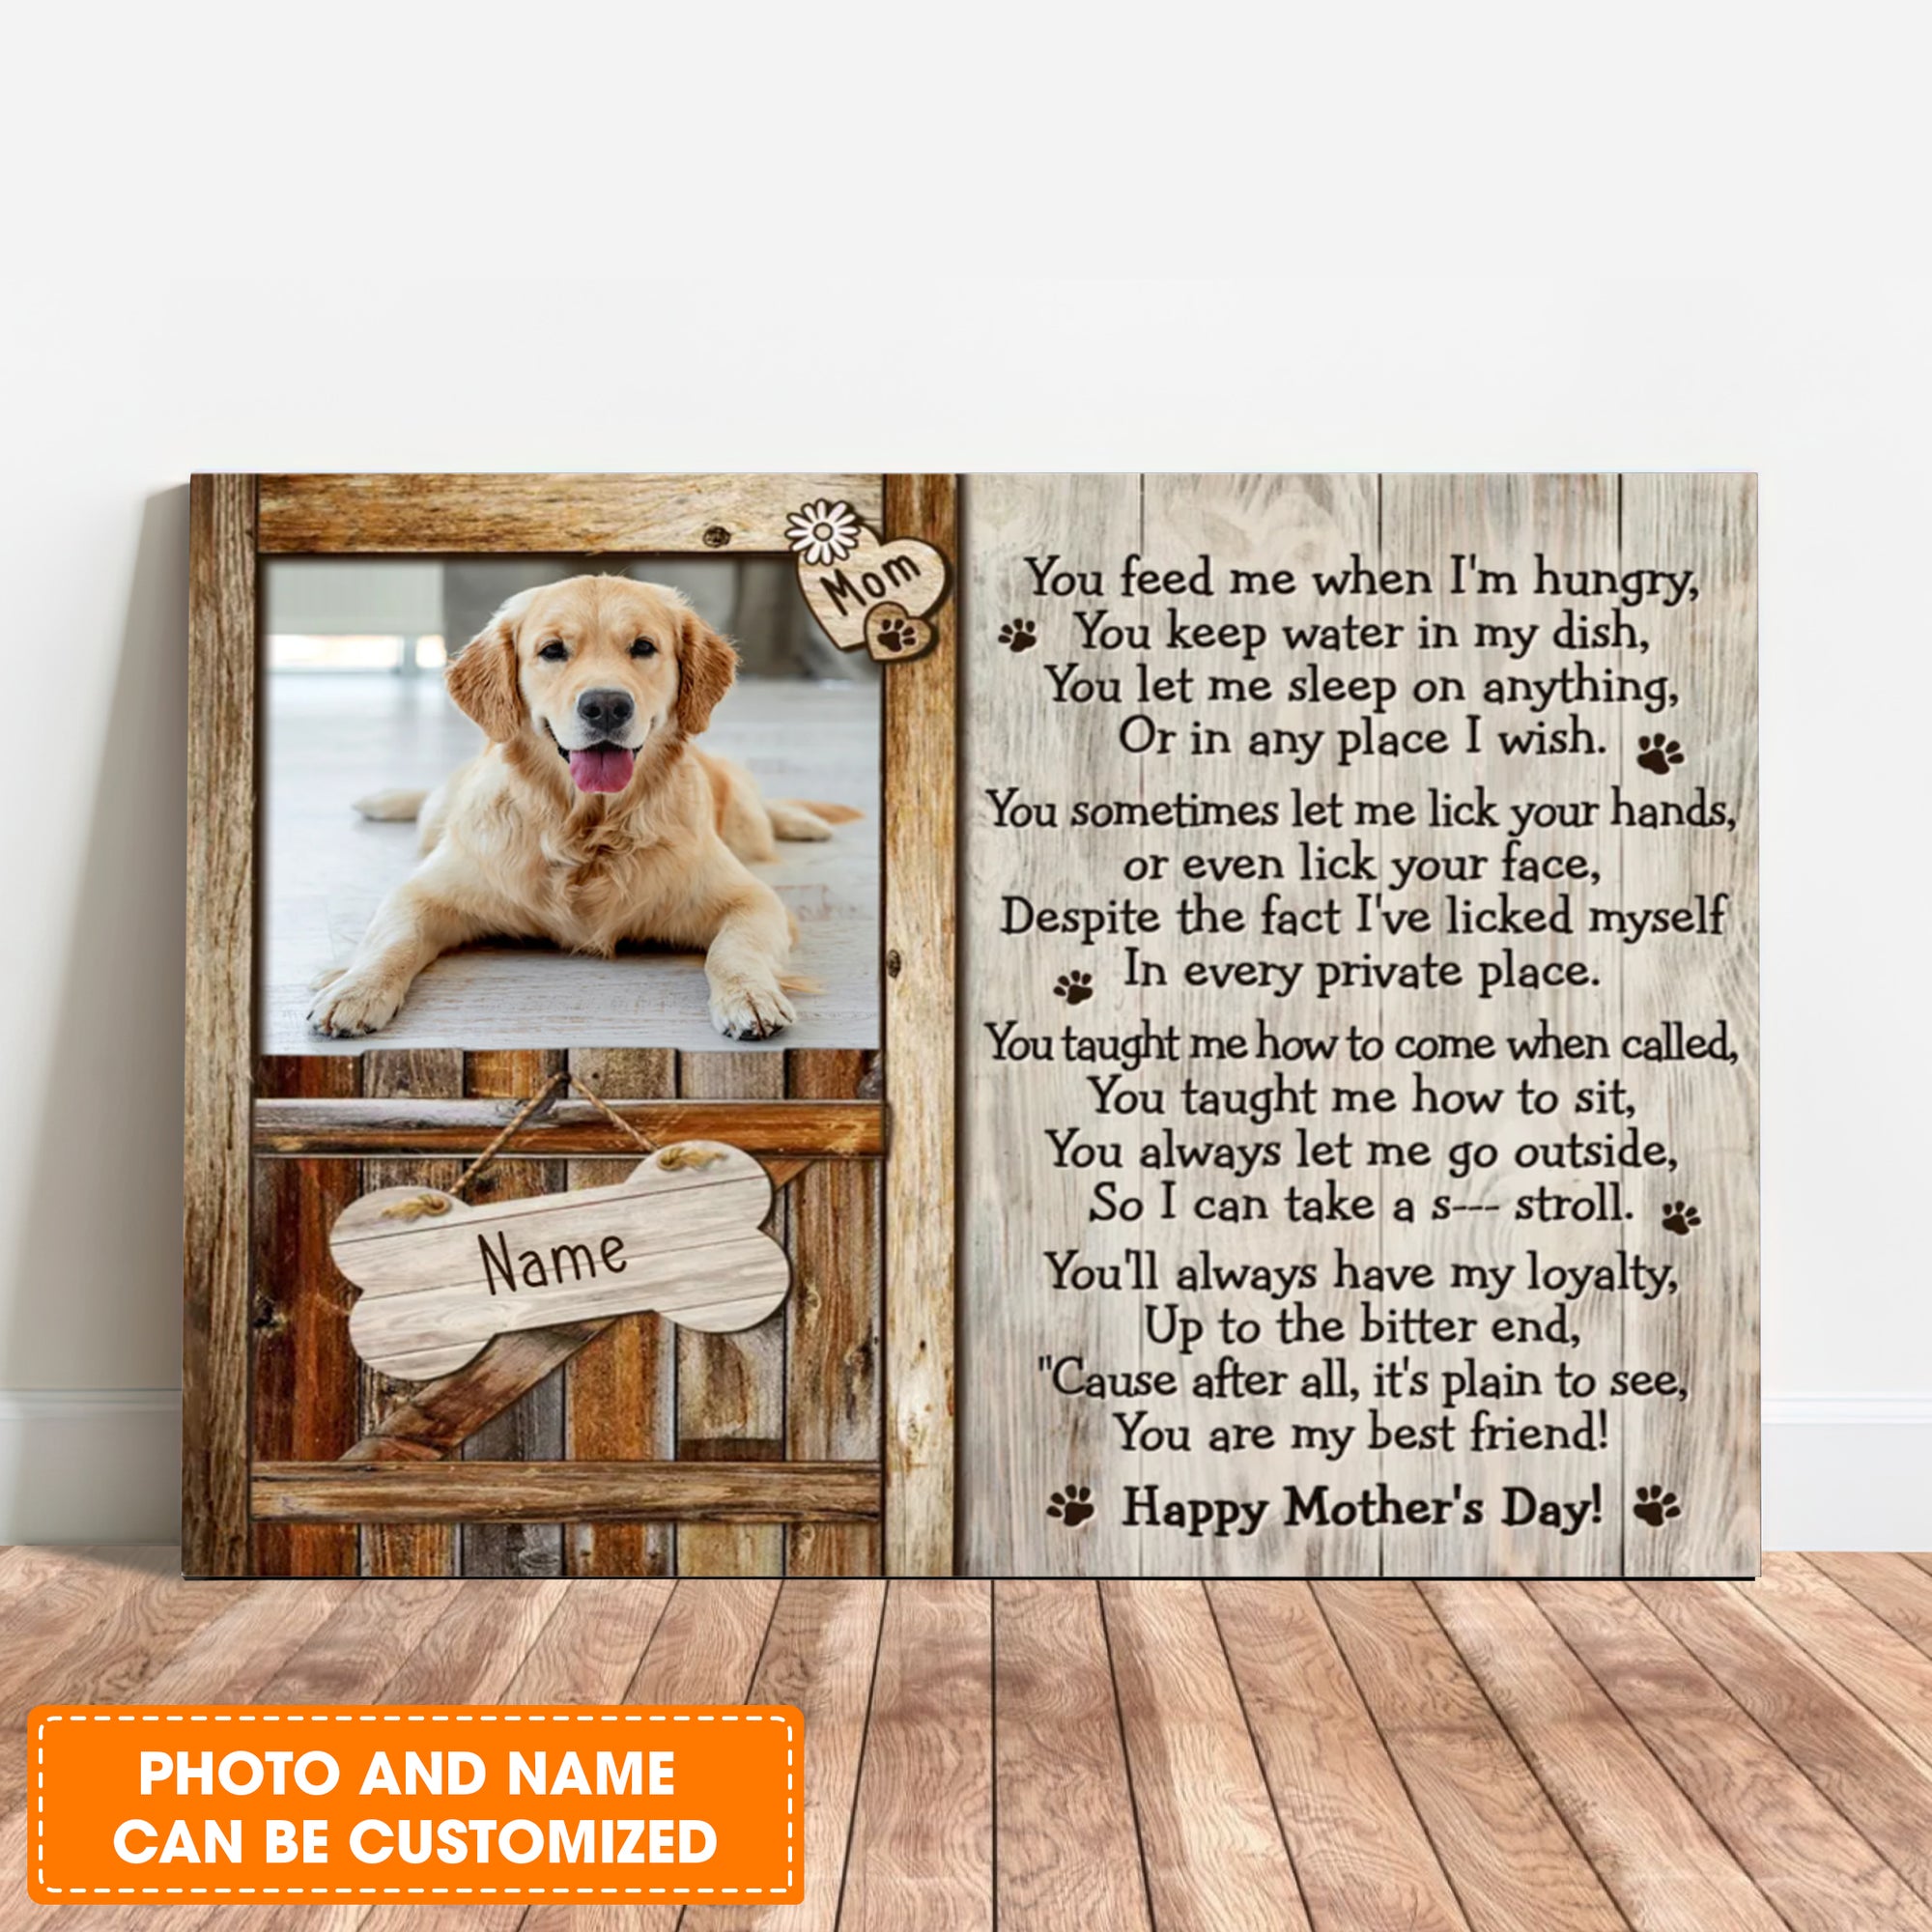 Custom Name & Photo Dog Premium Wrapped Landscape Canvas, Mothers Day Personalized Dog Canvas - Perfect Gift For Dog Lovers, Family, Dog Mom